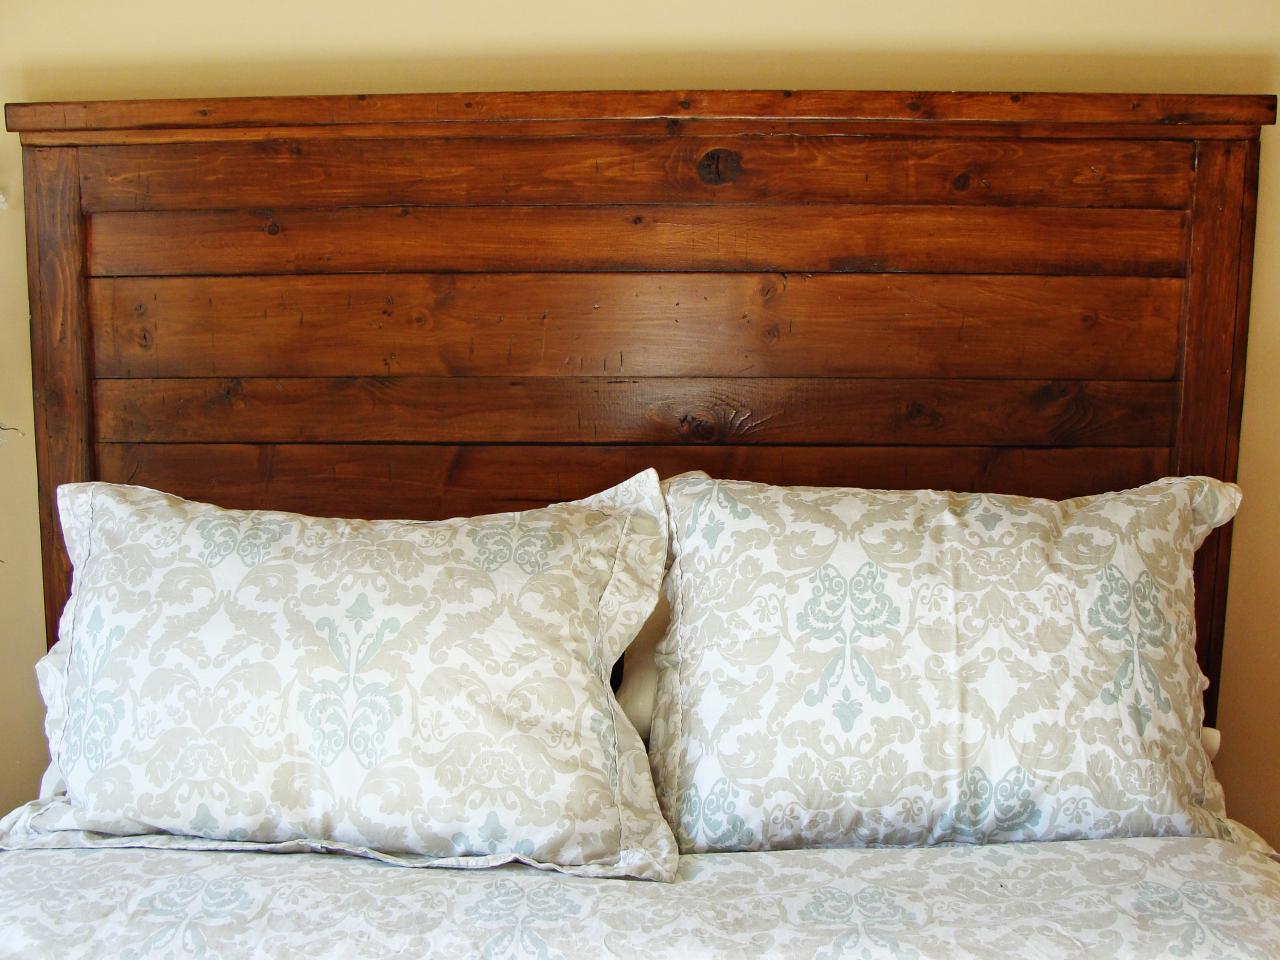 How To Build A Rustic Wood Headboard, Diy Rustic Queen Bed Frame With Storage Plans